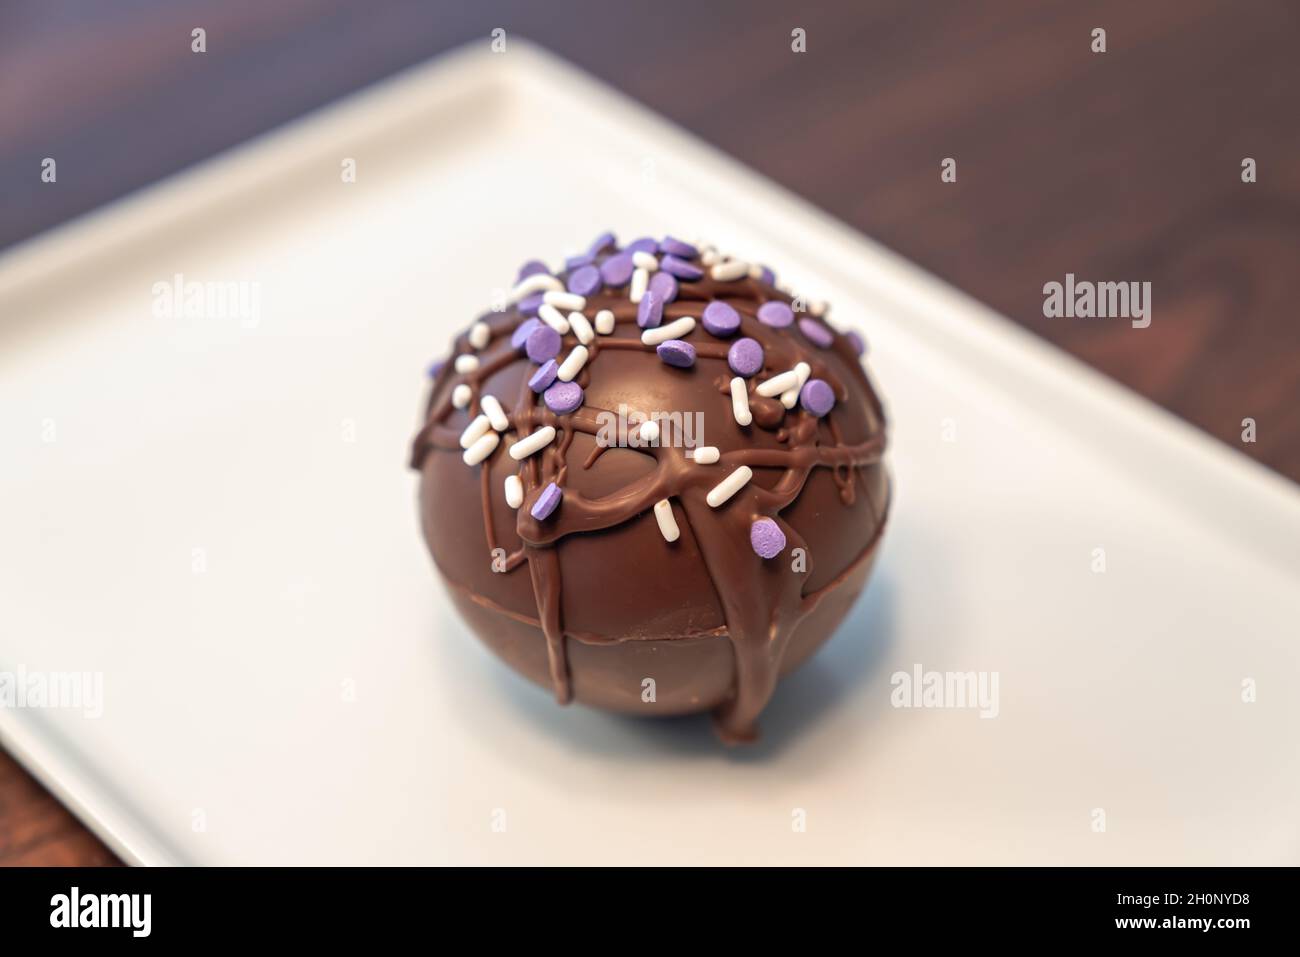 Close up food photograph of a hot cocoa or chocolate bomb covered in drizzled brown chocolate and purple and white sprinkles set on a rectangular plat Stock Photo